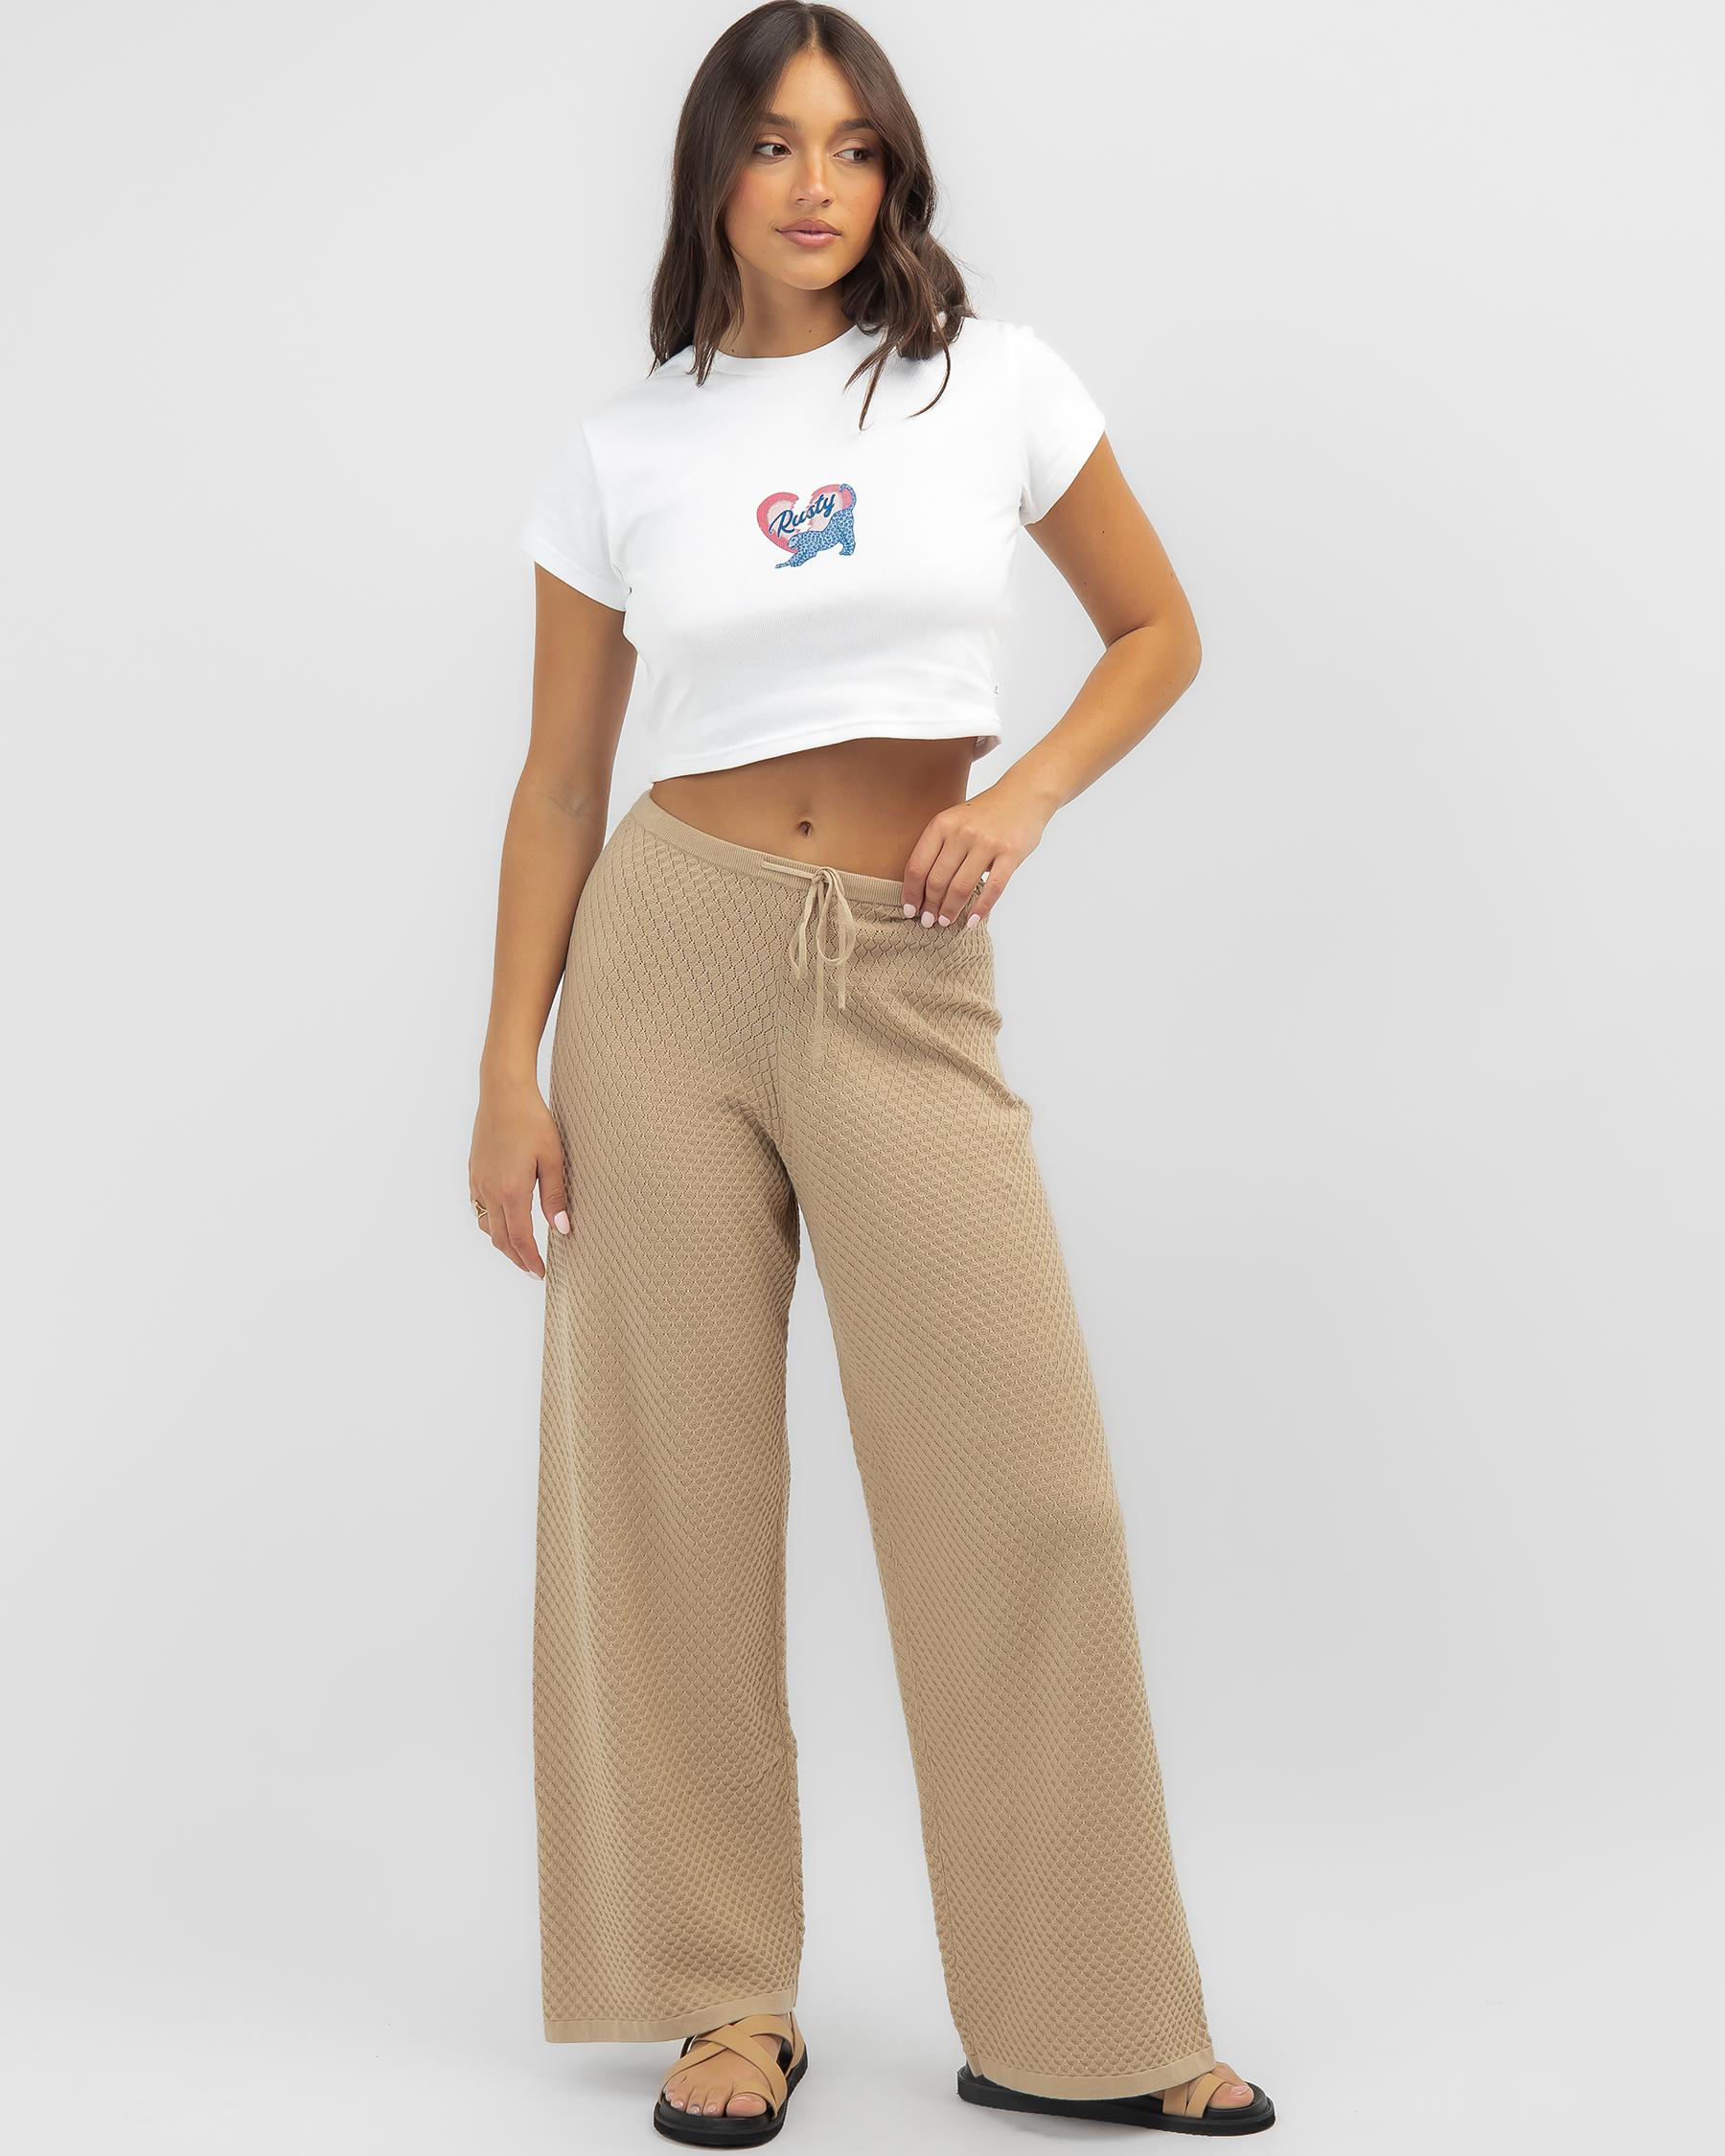 Rusty Florence Pants In Oatmilk - Fast Shipping & Easy Returns - City ...